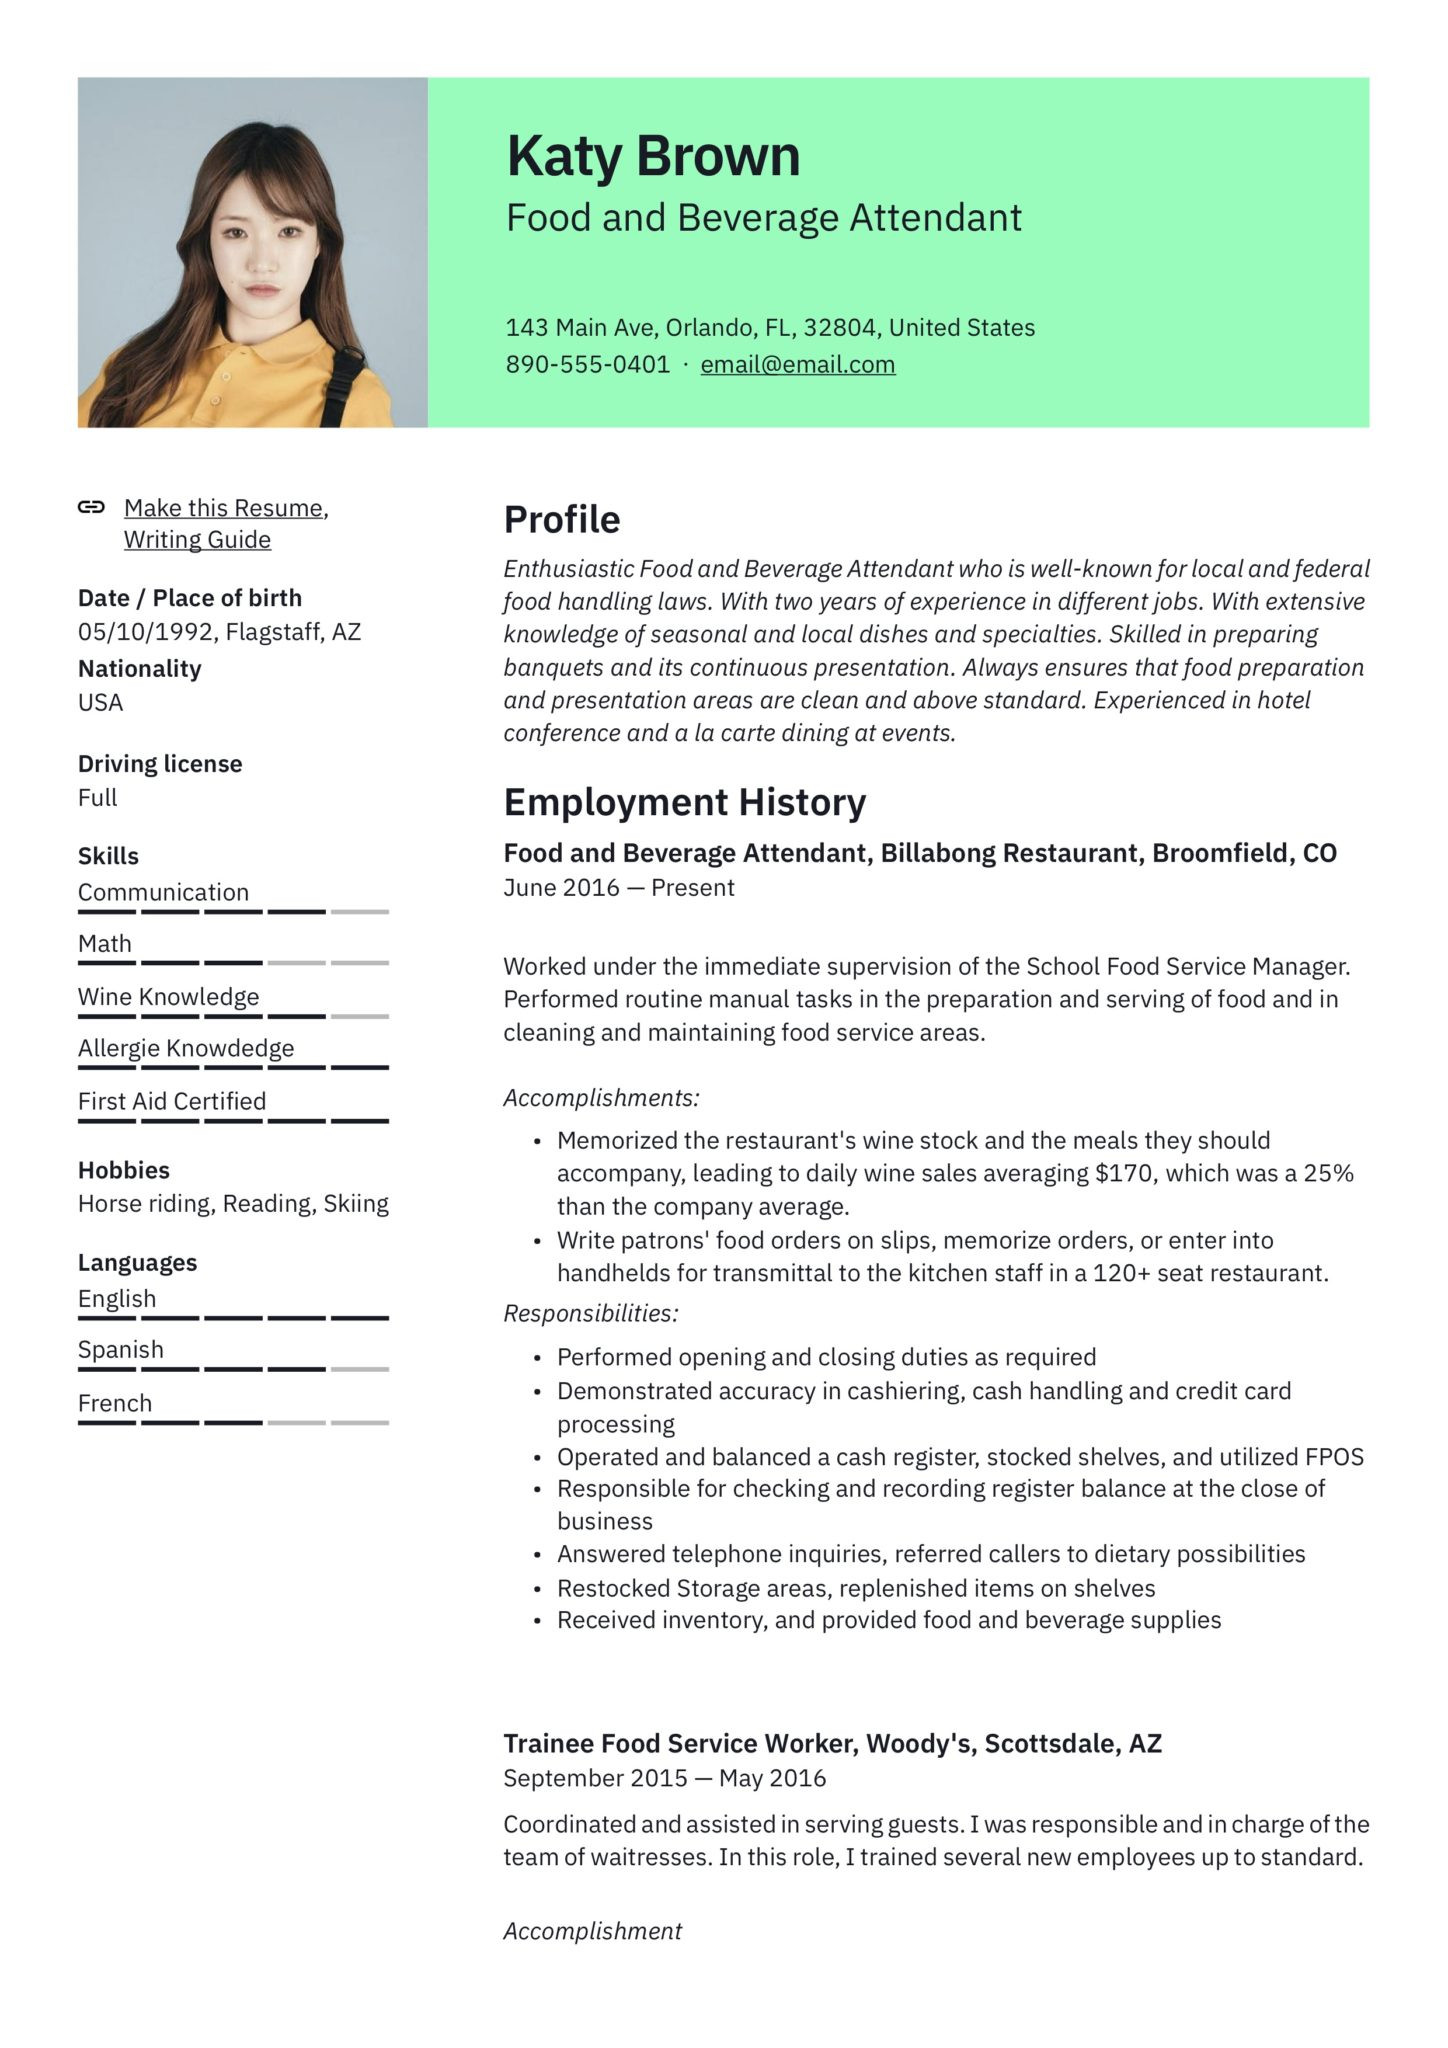 Food and Beverage attendant Resume Sample What Level Food and Beverage attendant Am I